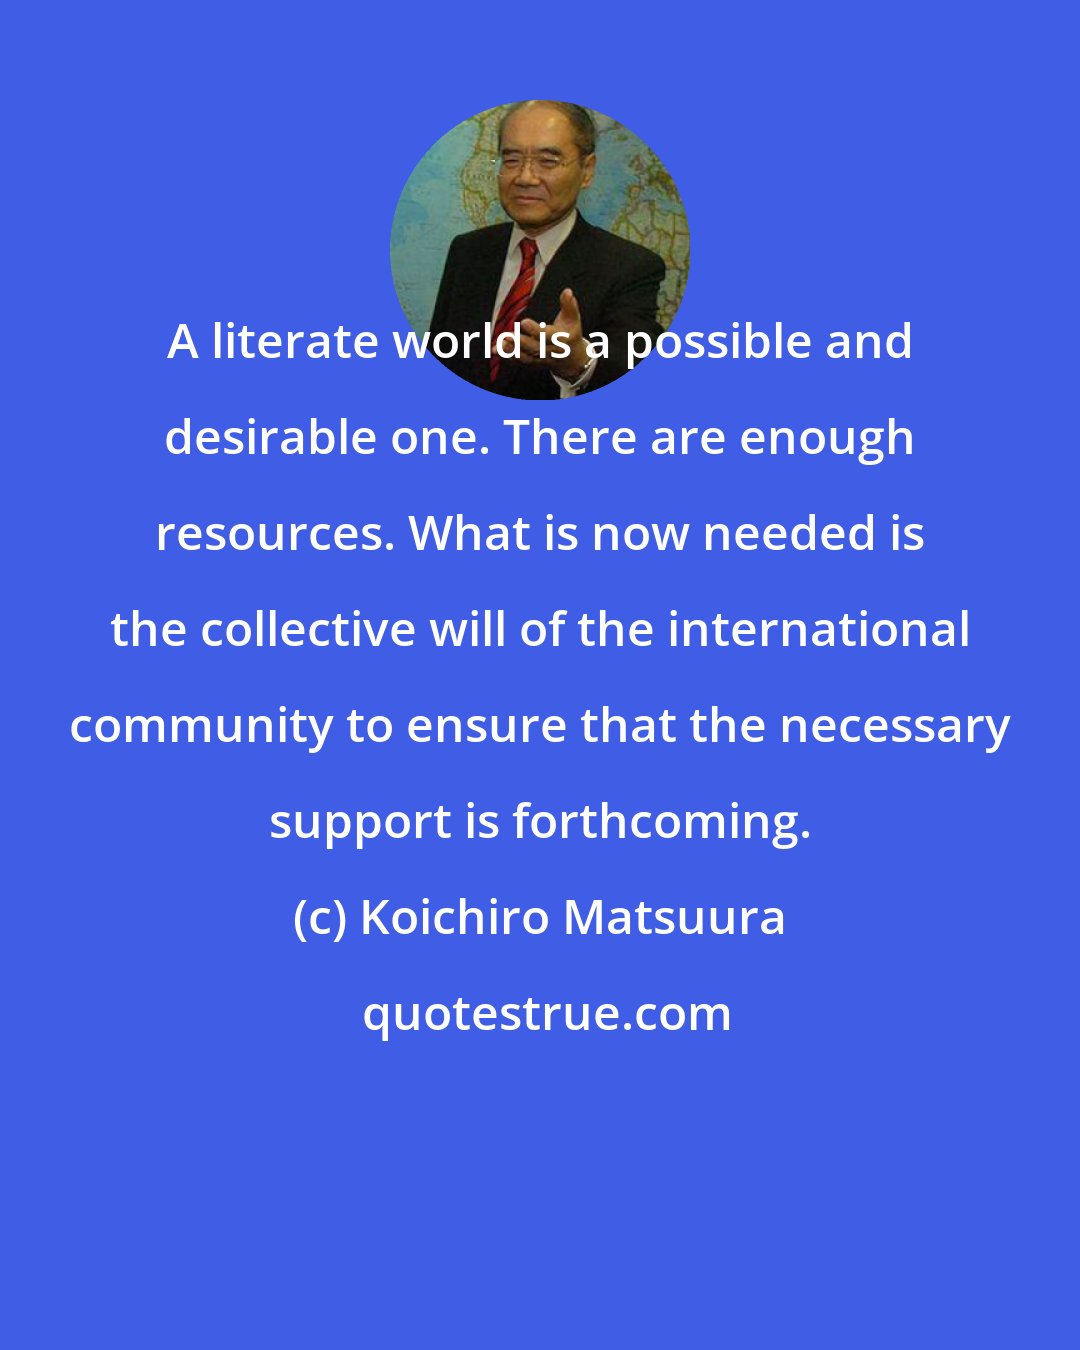 Koichiro Matsuura: A literate world is a possible and desirable one. There are enough resources. What is now needed is the collective will of the international community to ensure that the necessary support is forthcoming.